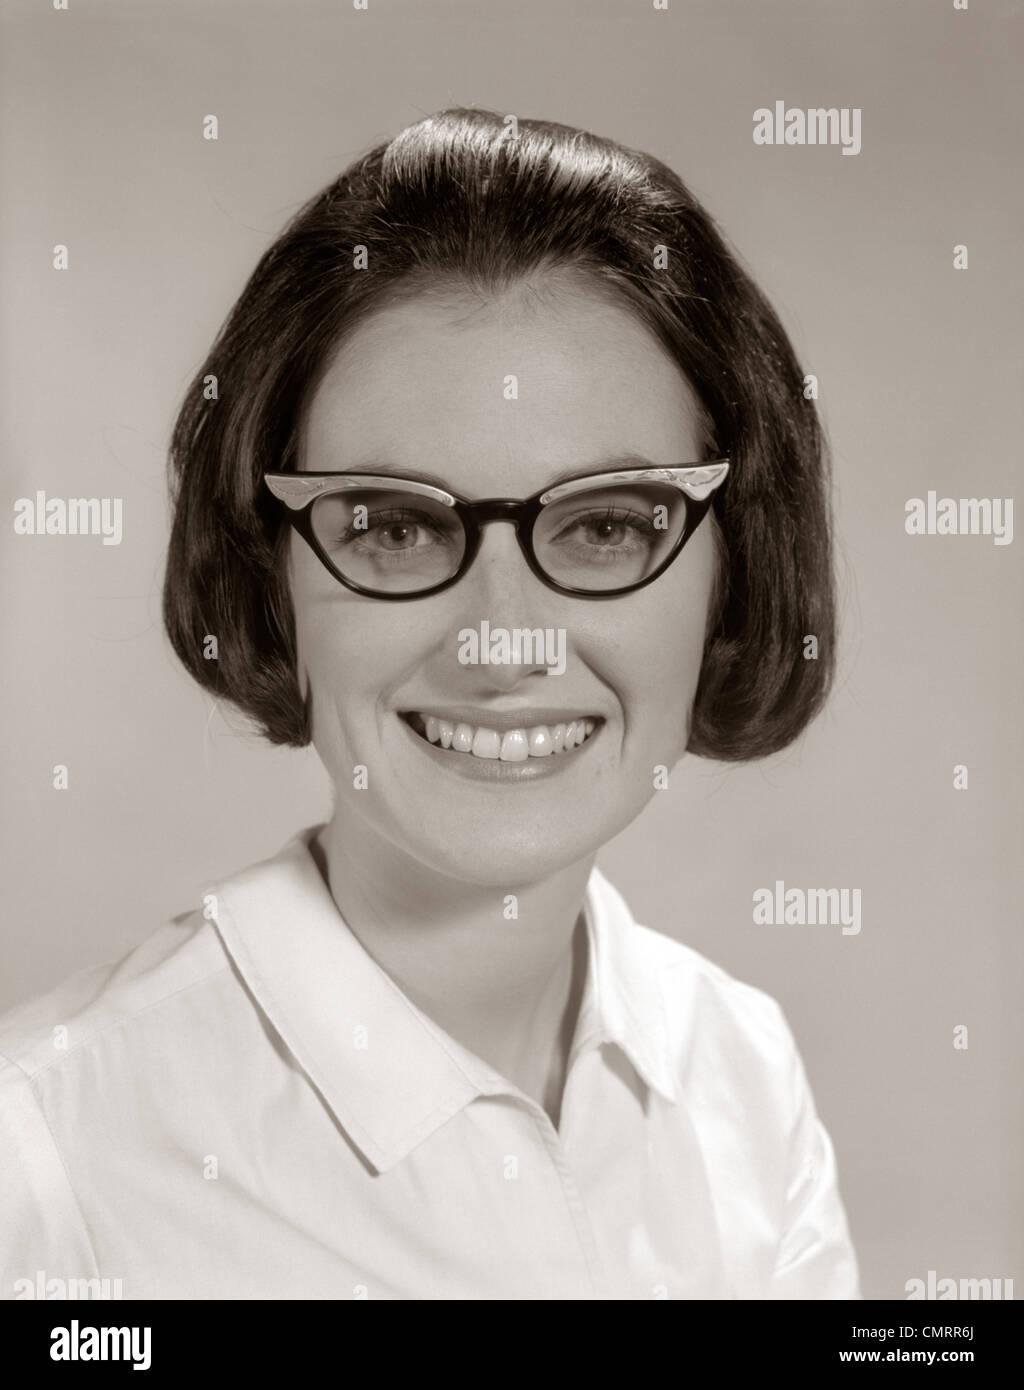 1960s SMILING PORTRAIT WOMAN WEARING HORN-RIMMED GLASSES LOOKING AT CAMERA Stock Photo